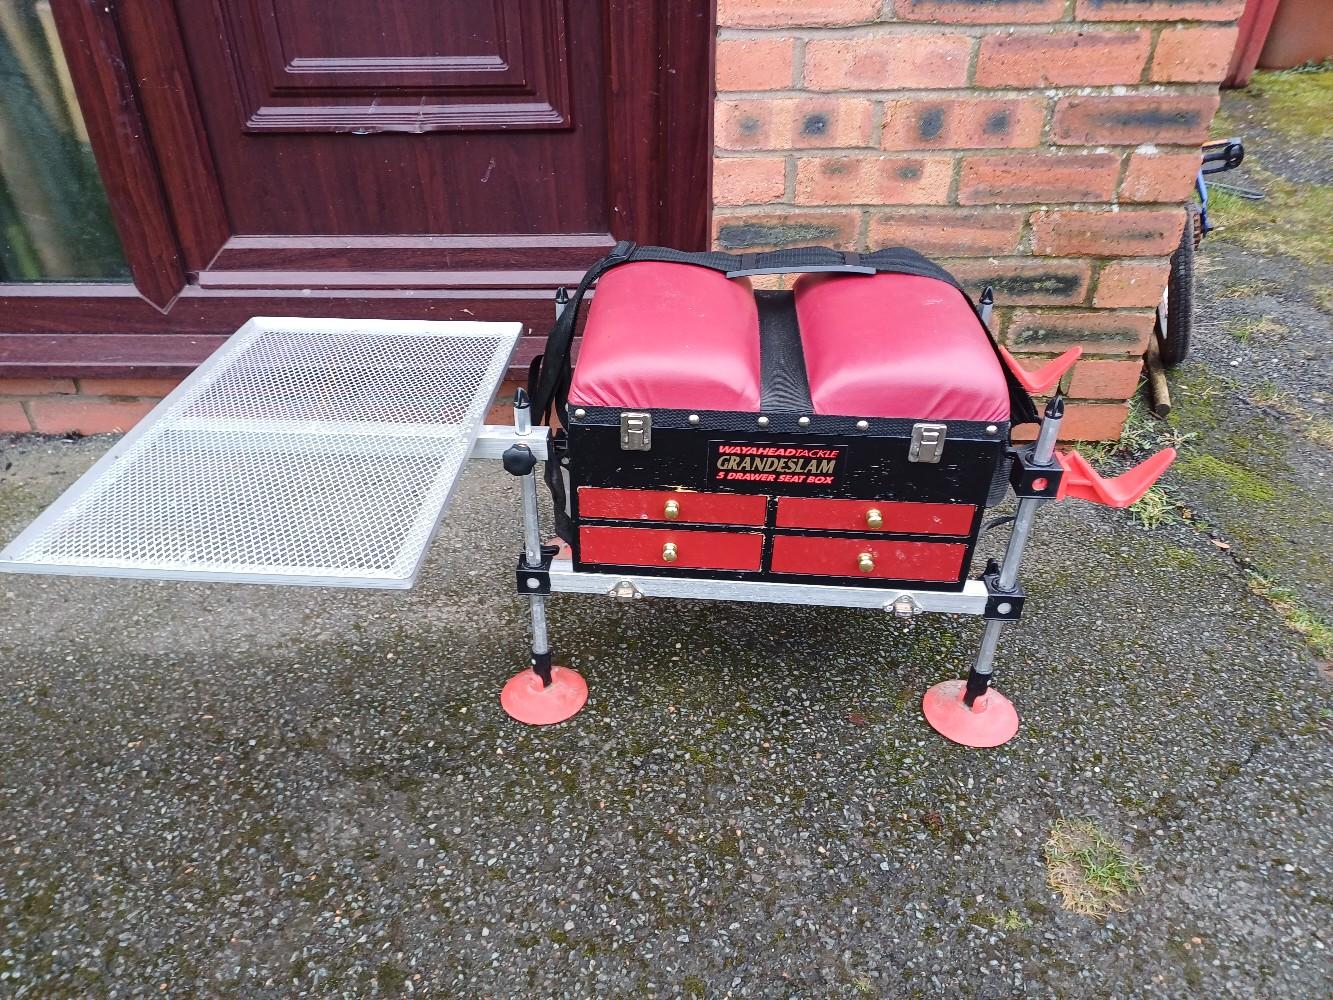 Fishing seat box VGC £25 in BB3 Darwen for £25.00 for sale